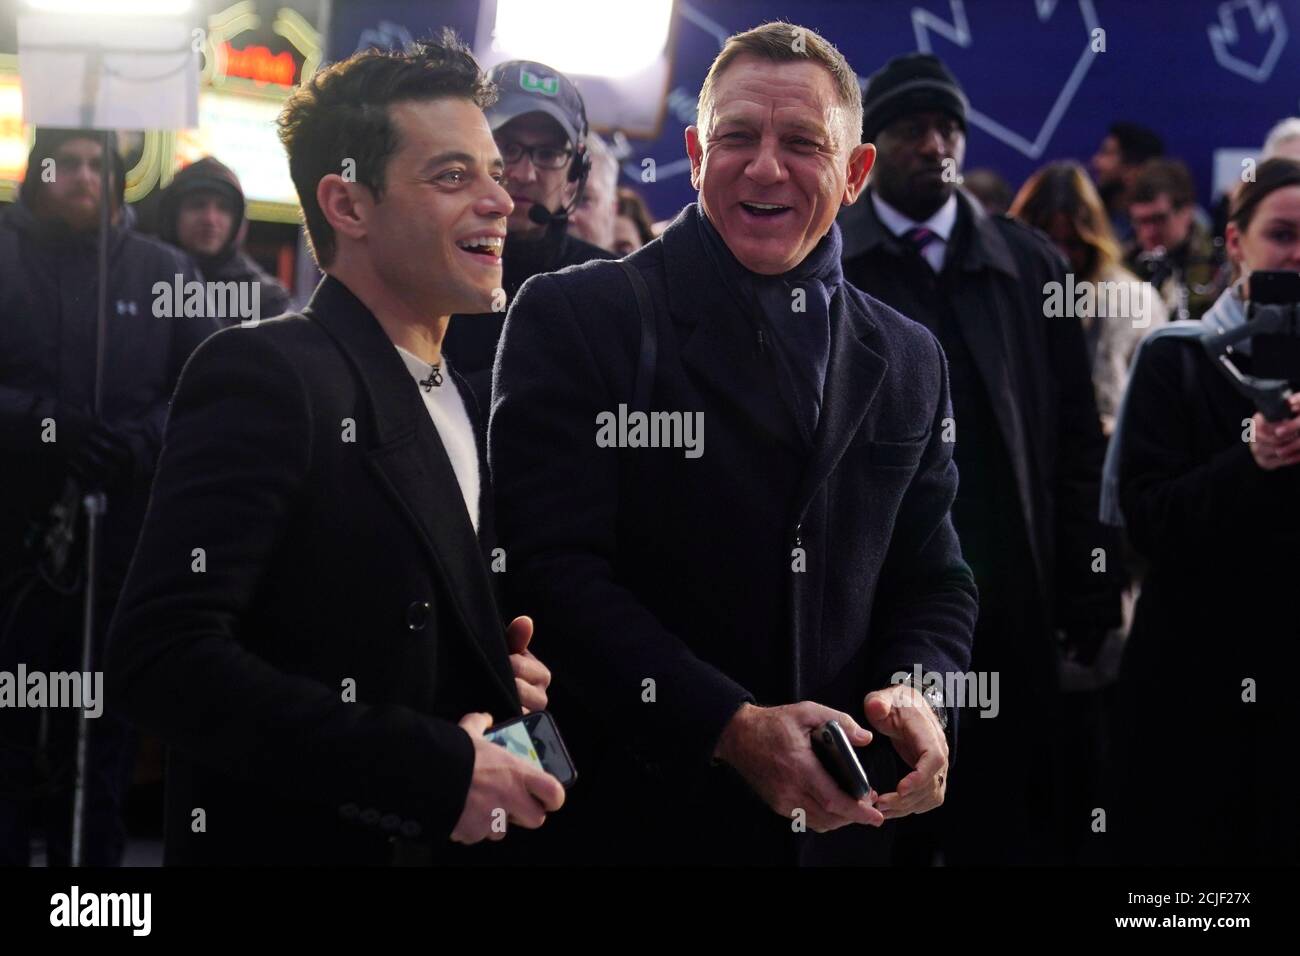 Actors Daniel Craig and Rami Malek talk during a promotional appearance on  TV in Times Square for the new James Bond movie "No Time to Die" in the  Manhattan borough of New